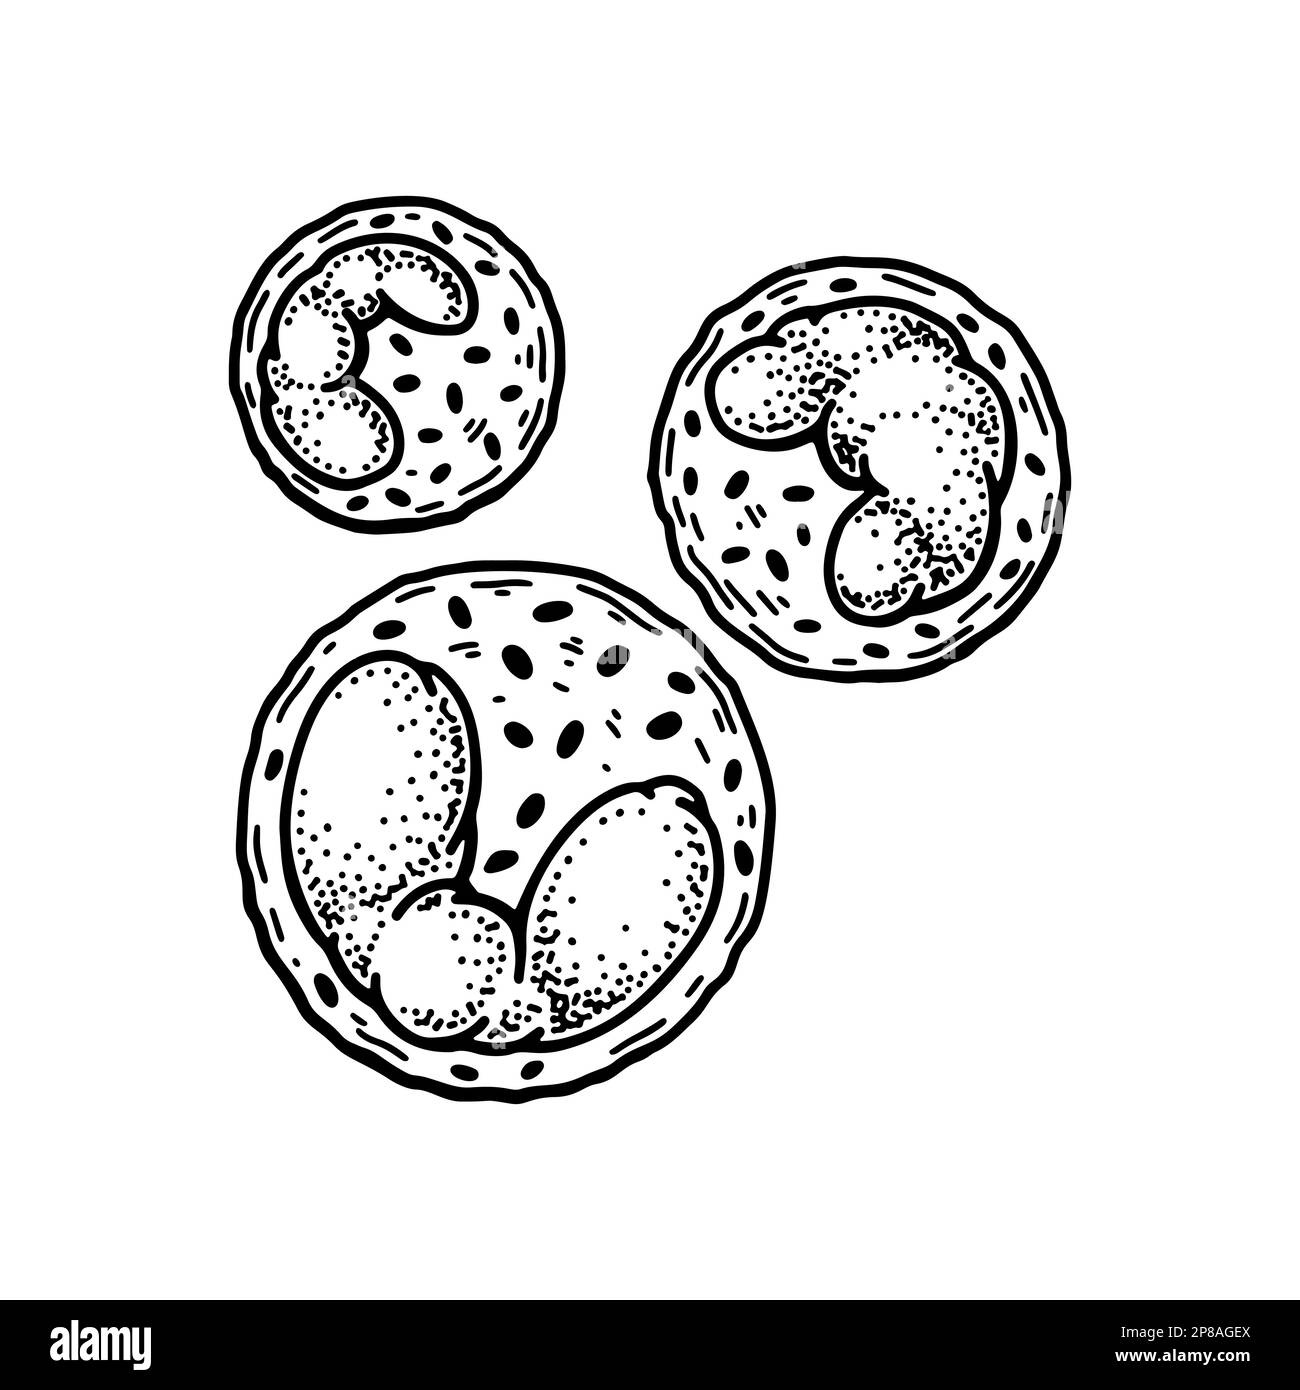 Basophil leukocyte white blood cells isolated on white background. Hand drawn scientific microbiology vector illustration in sketch style Stock Vector